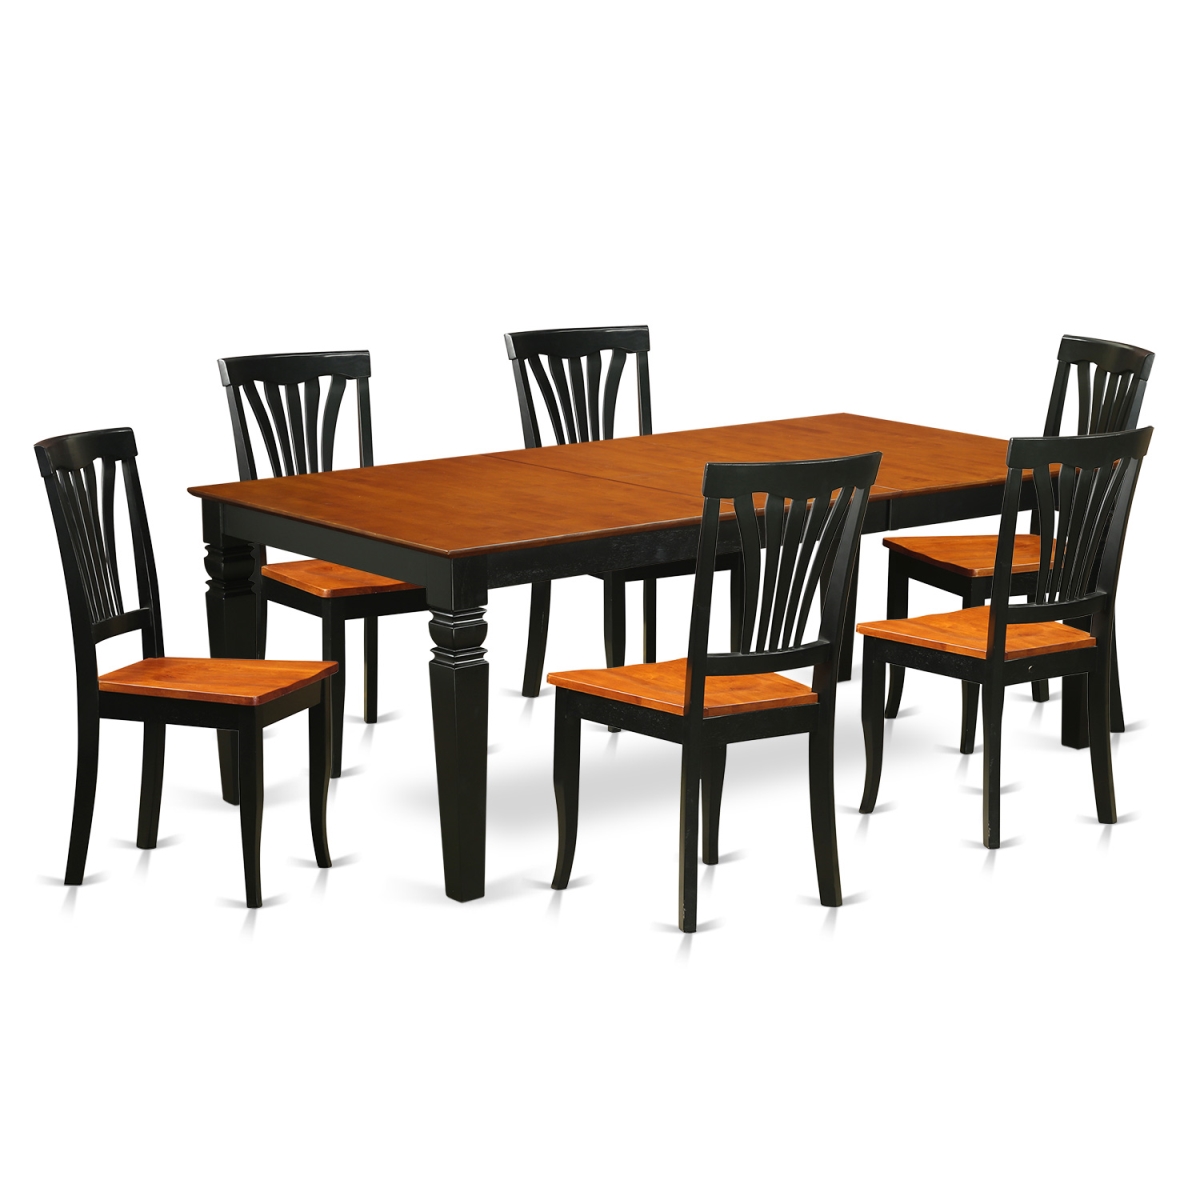 Lgav7-bch-w Dinette Set With One Logan Table & 6 Chairs, Black & Cherry - 7 Piece